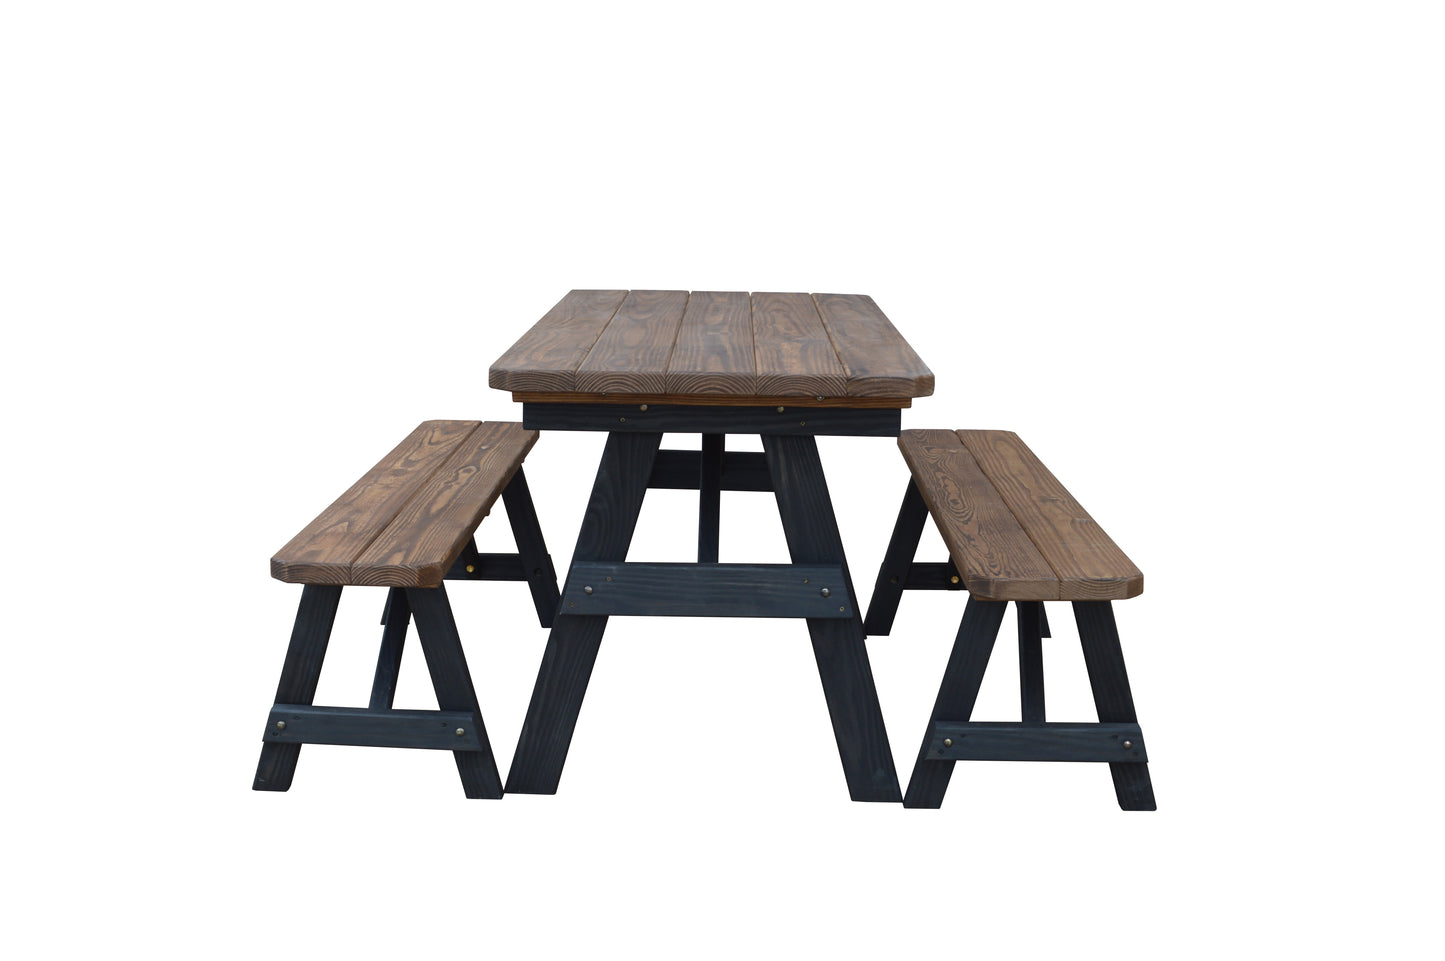 A&L Furniture Co. Pressure Treated Pine 5' Traditional Picnic Table w/2 Benches Mushroom on Black - LEAD TIME TO SHIP 10 BUSINESS DAYS